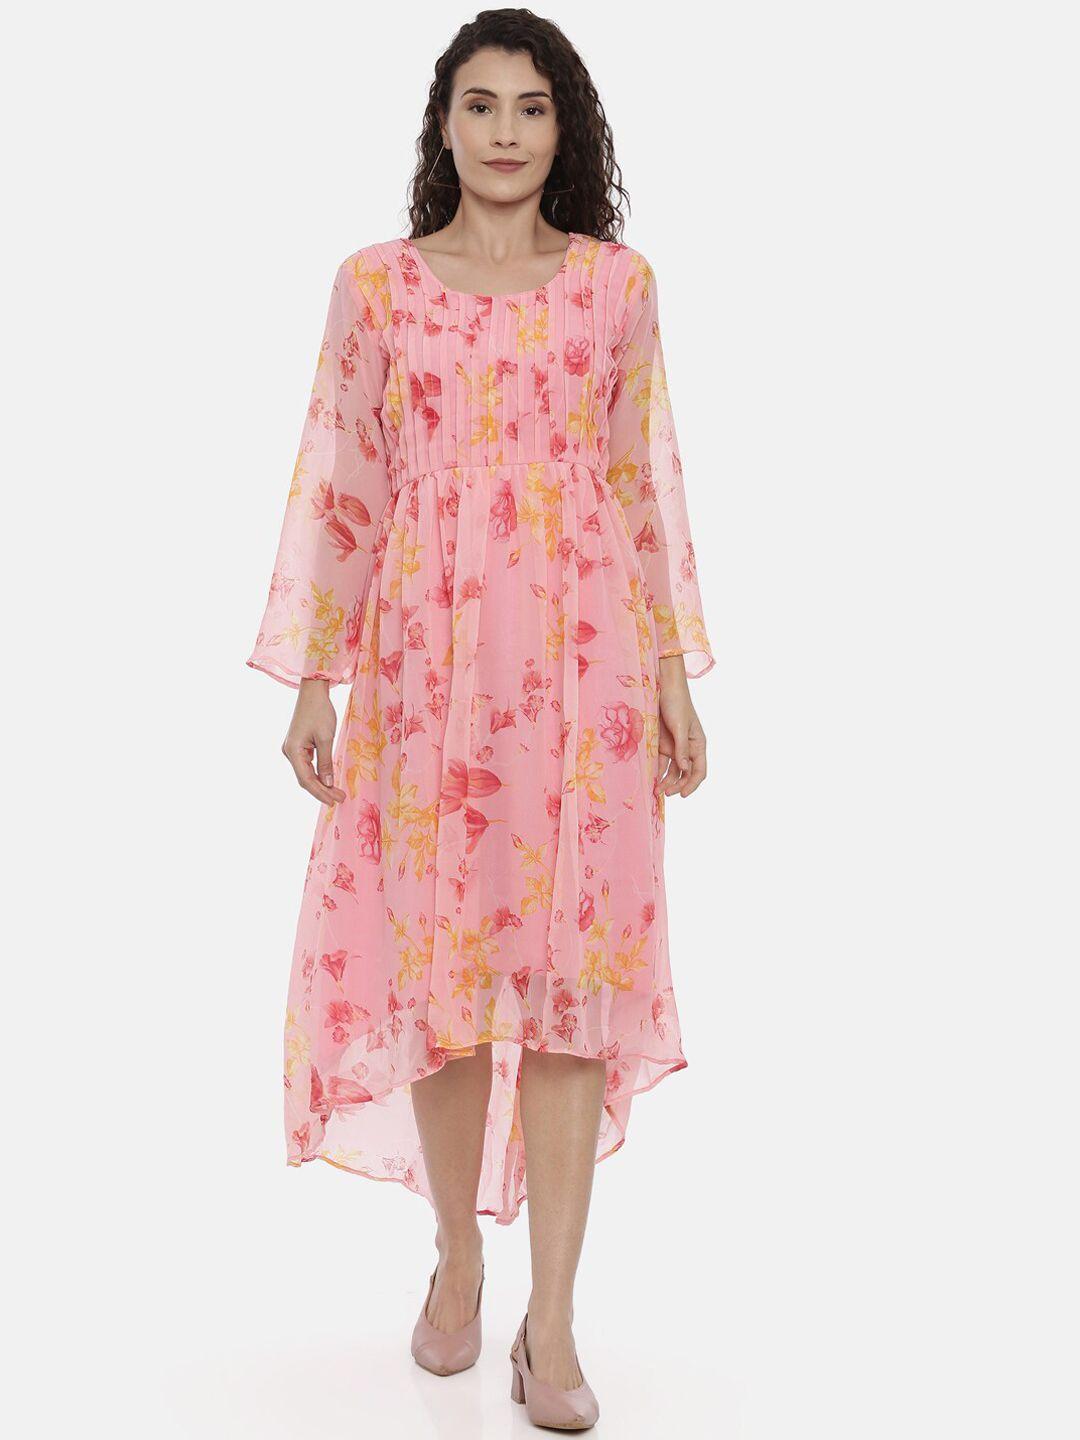 souchii women pink floral printed a-line dress